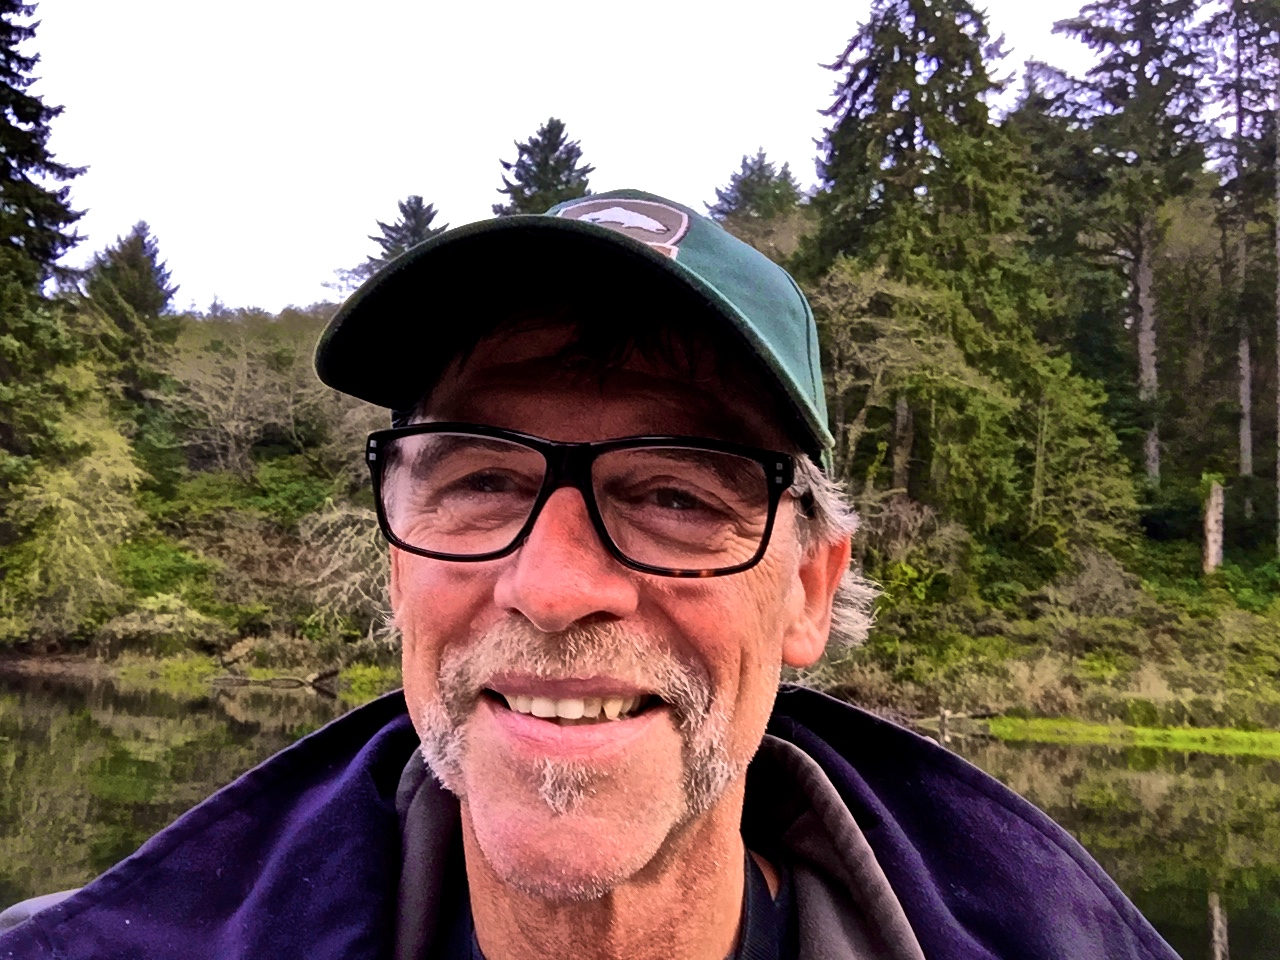 The Oregon coast is a wonderful place to fish. I have had smiles, sun, rain, trout, and an occasional salmon to keep me busy with my foot in a bag each day. - Jay-Nicholas-Oregon-Fly-Fishing-Blog-11-04-f